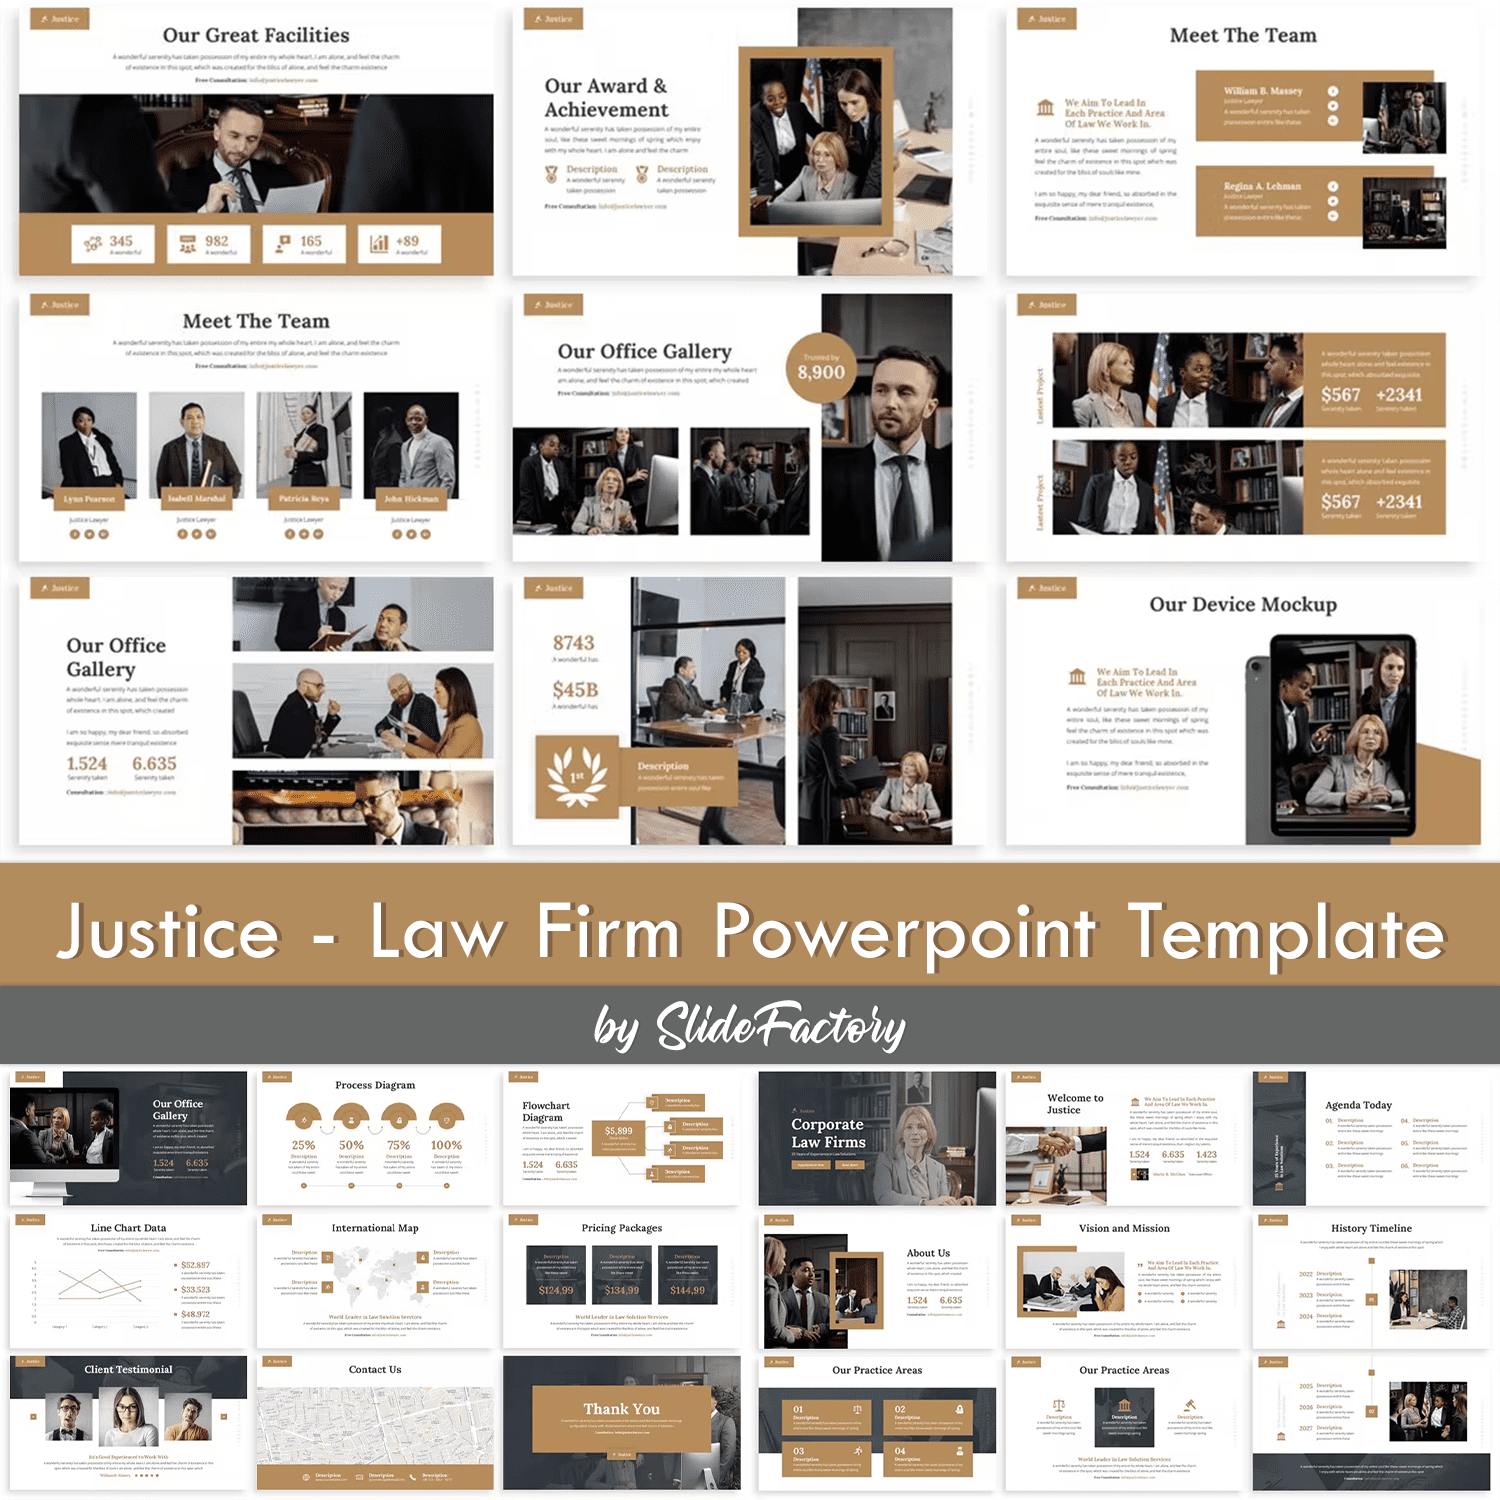 Preview justice law firm powerpoint template.